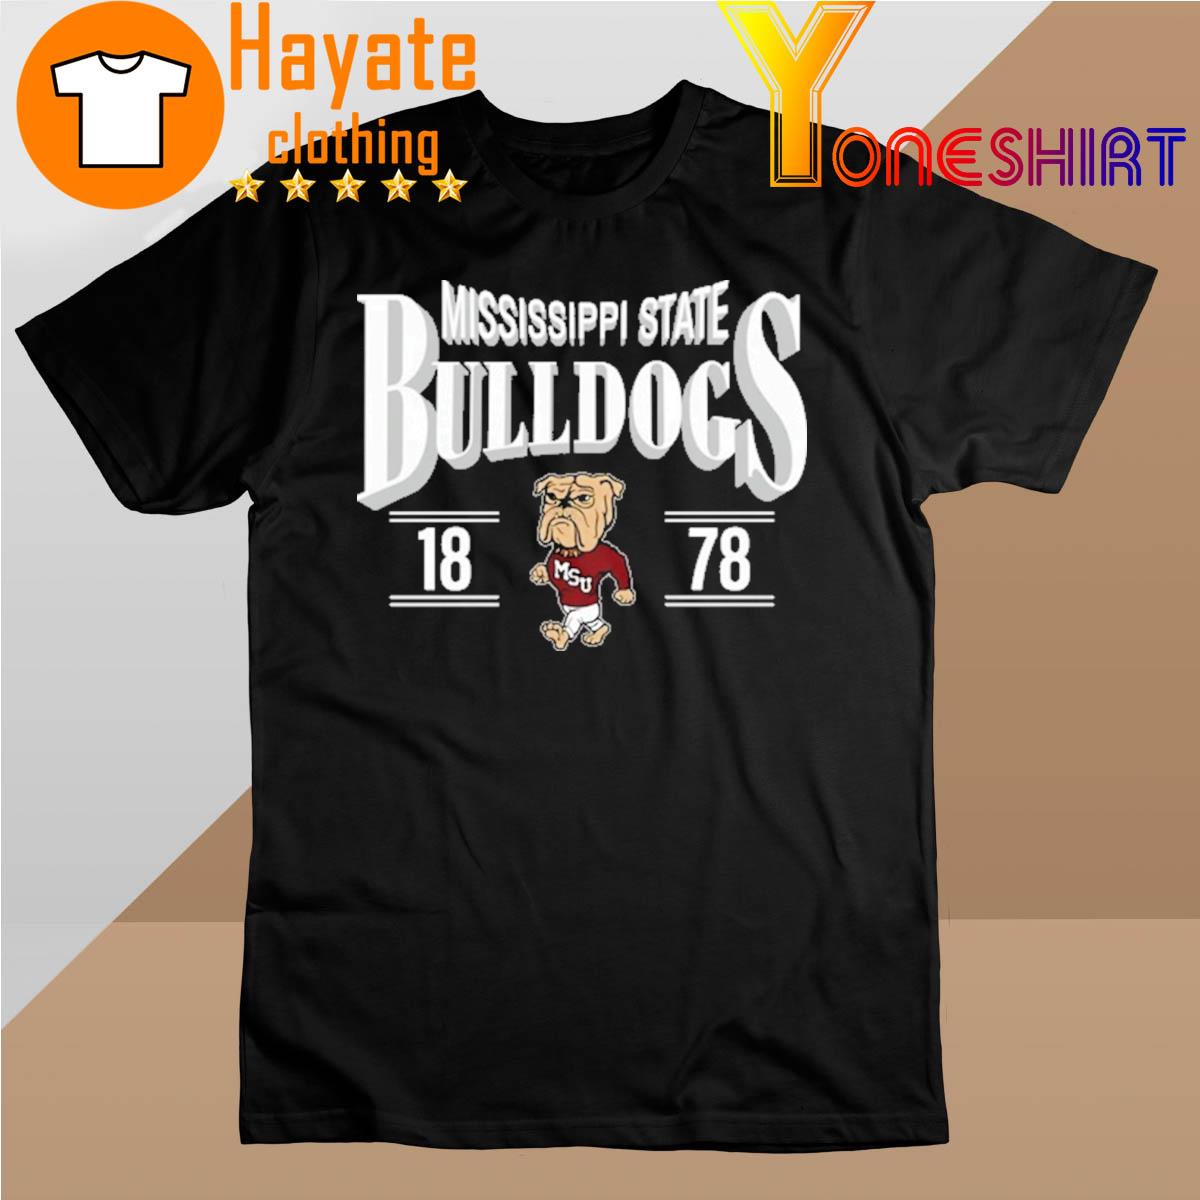 Official Mississippi State Bulldogs 18 78 shirt